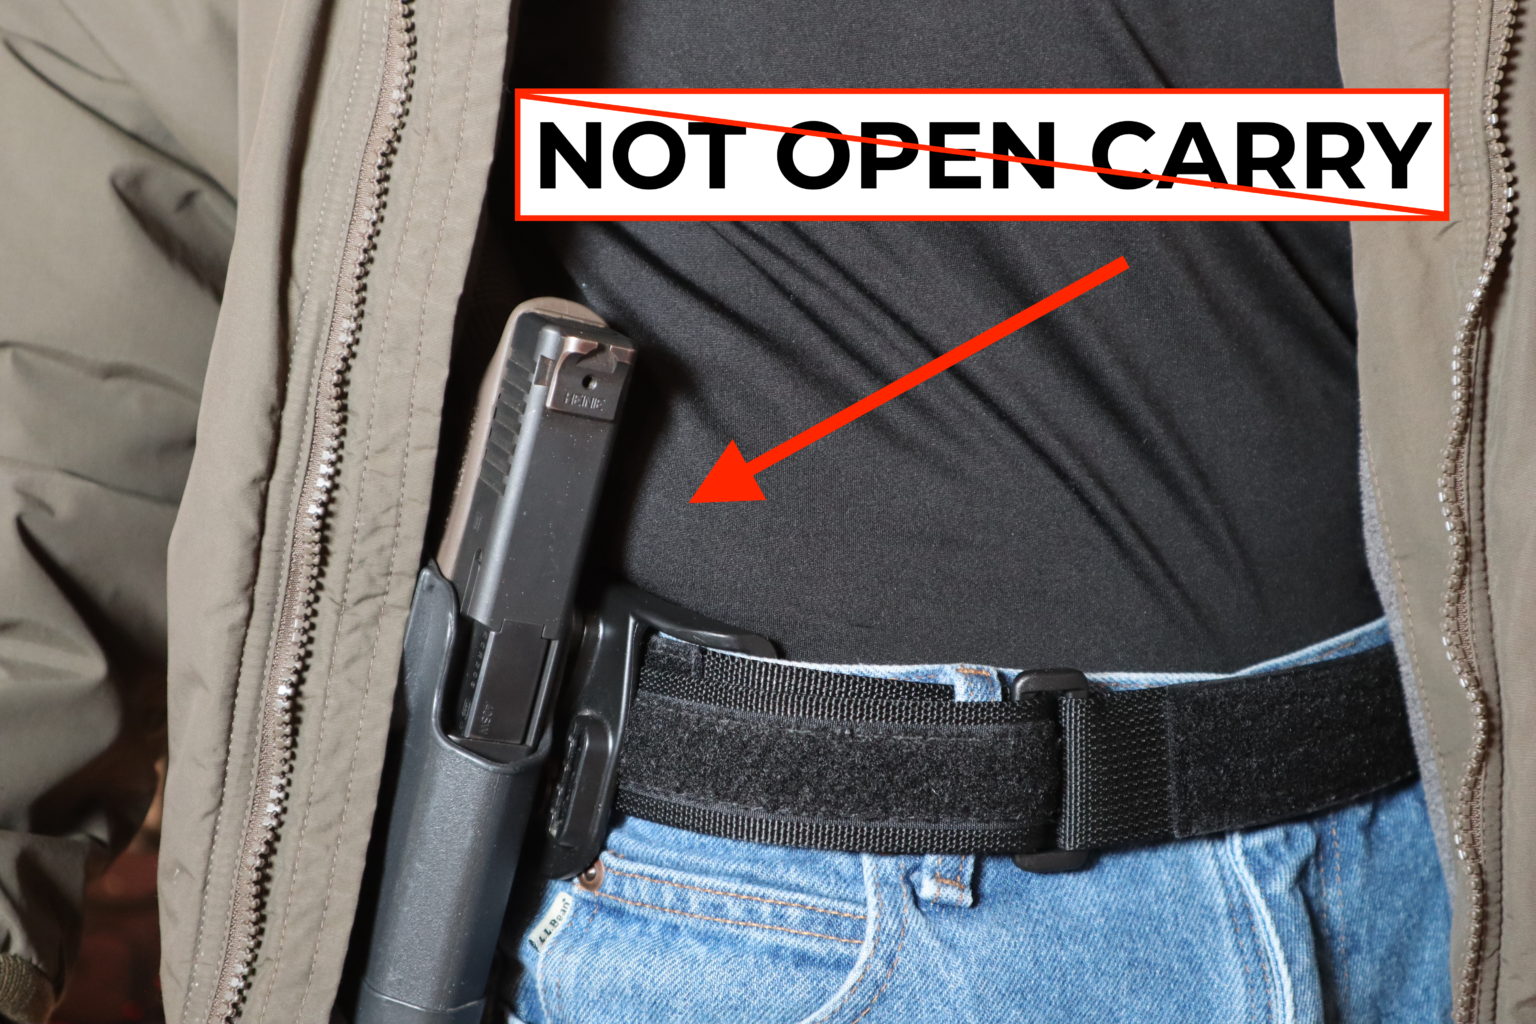 What is "Open Carry" and Should You? » Cobalt Firearm Instruction